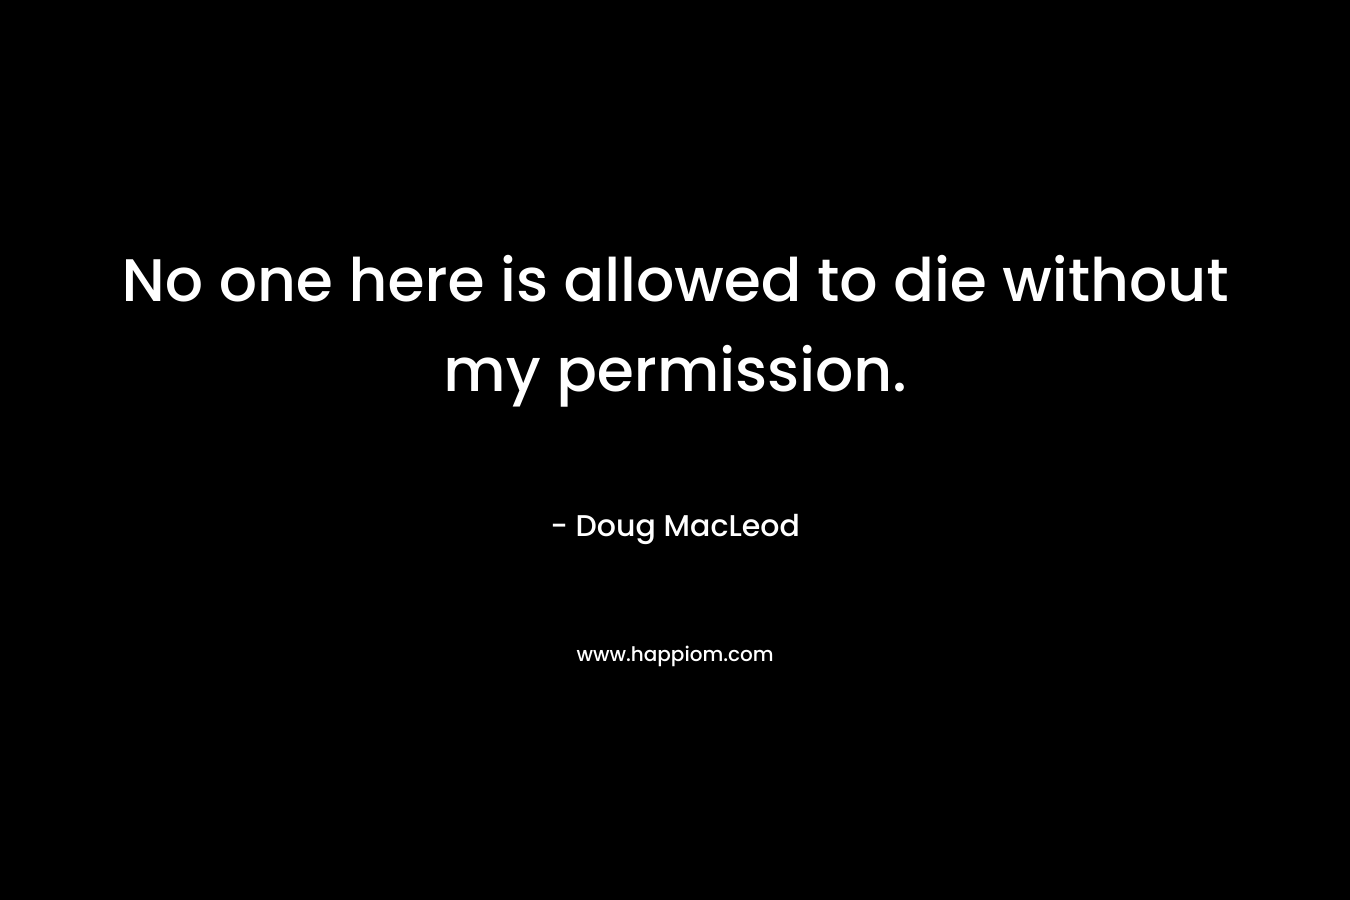 No one here is allowed to die without my permission.